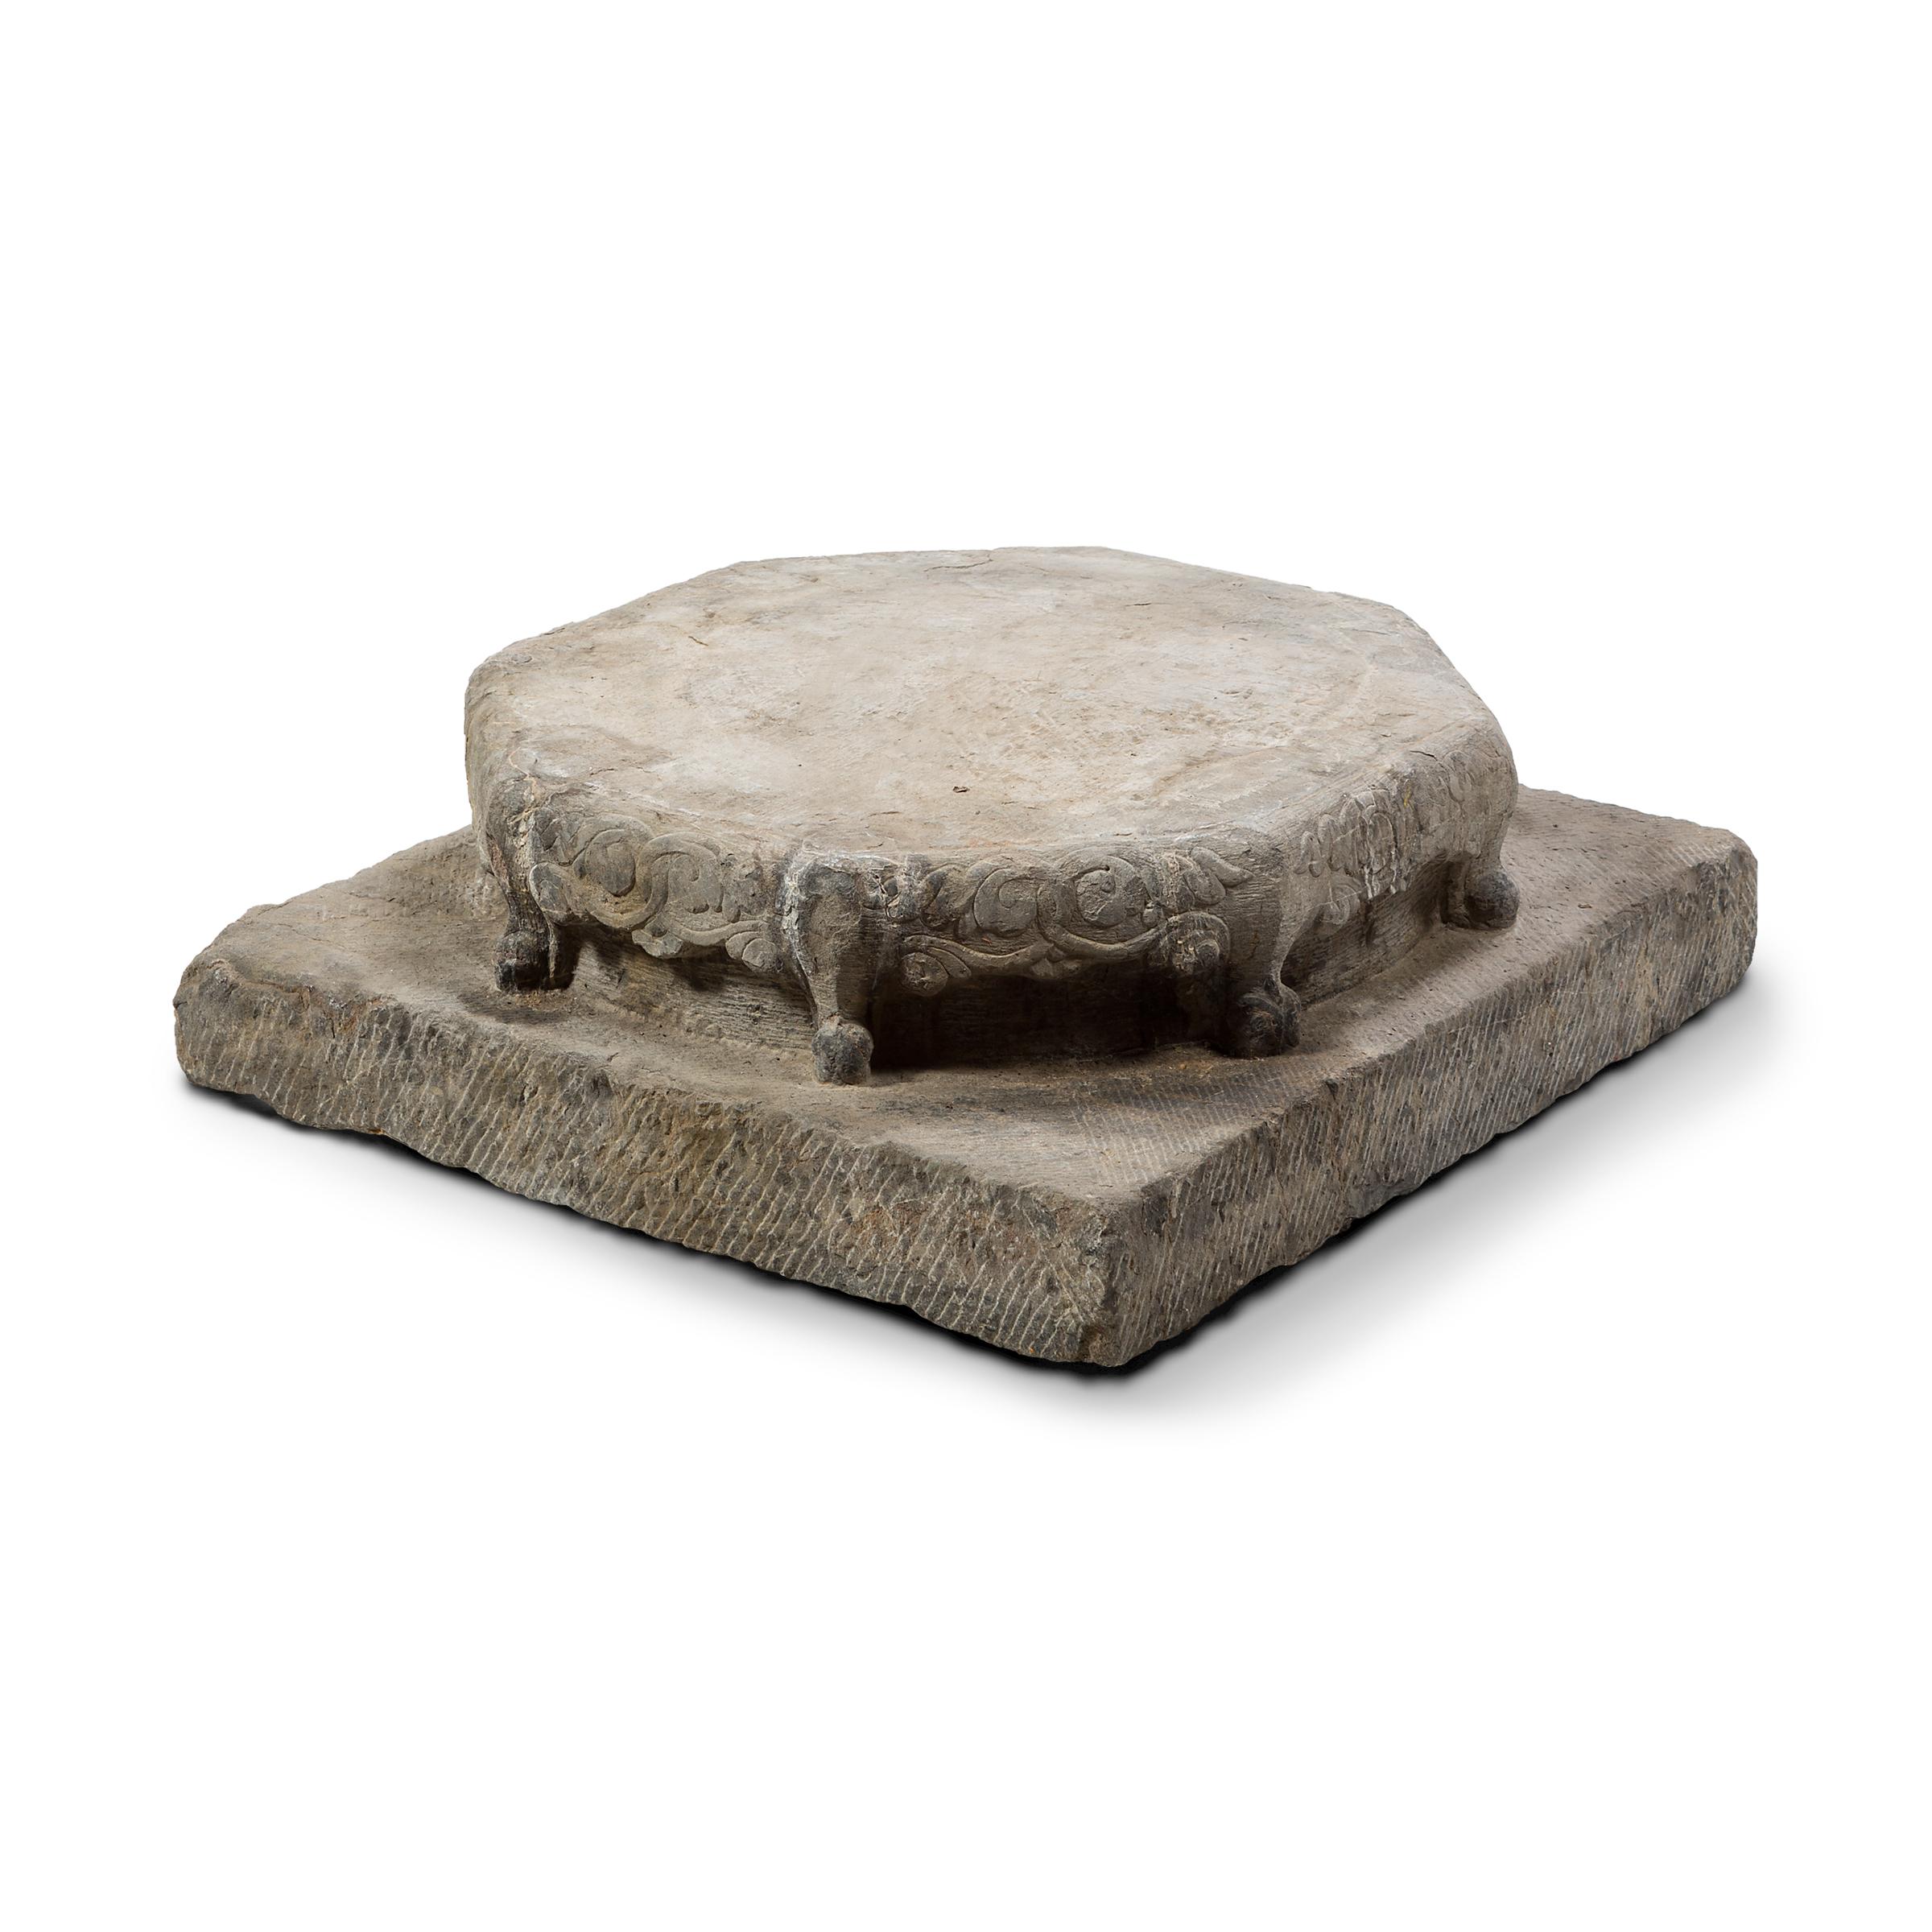 This 19th-century column base likely figured into the imposing surroundings of a Qing-dynasty courtyard, supporting a tall wooden beam as part of a grand entryway. Atop a square slab patterned with hash marks, sits an eight-sided base, carved with